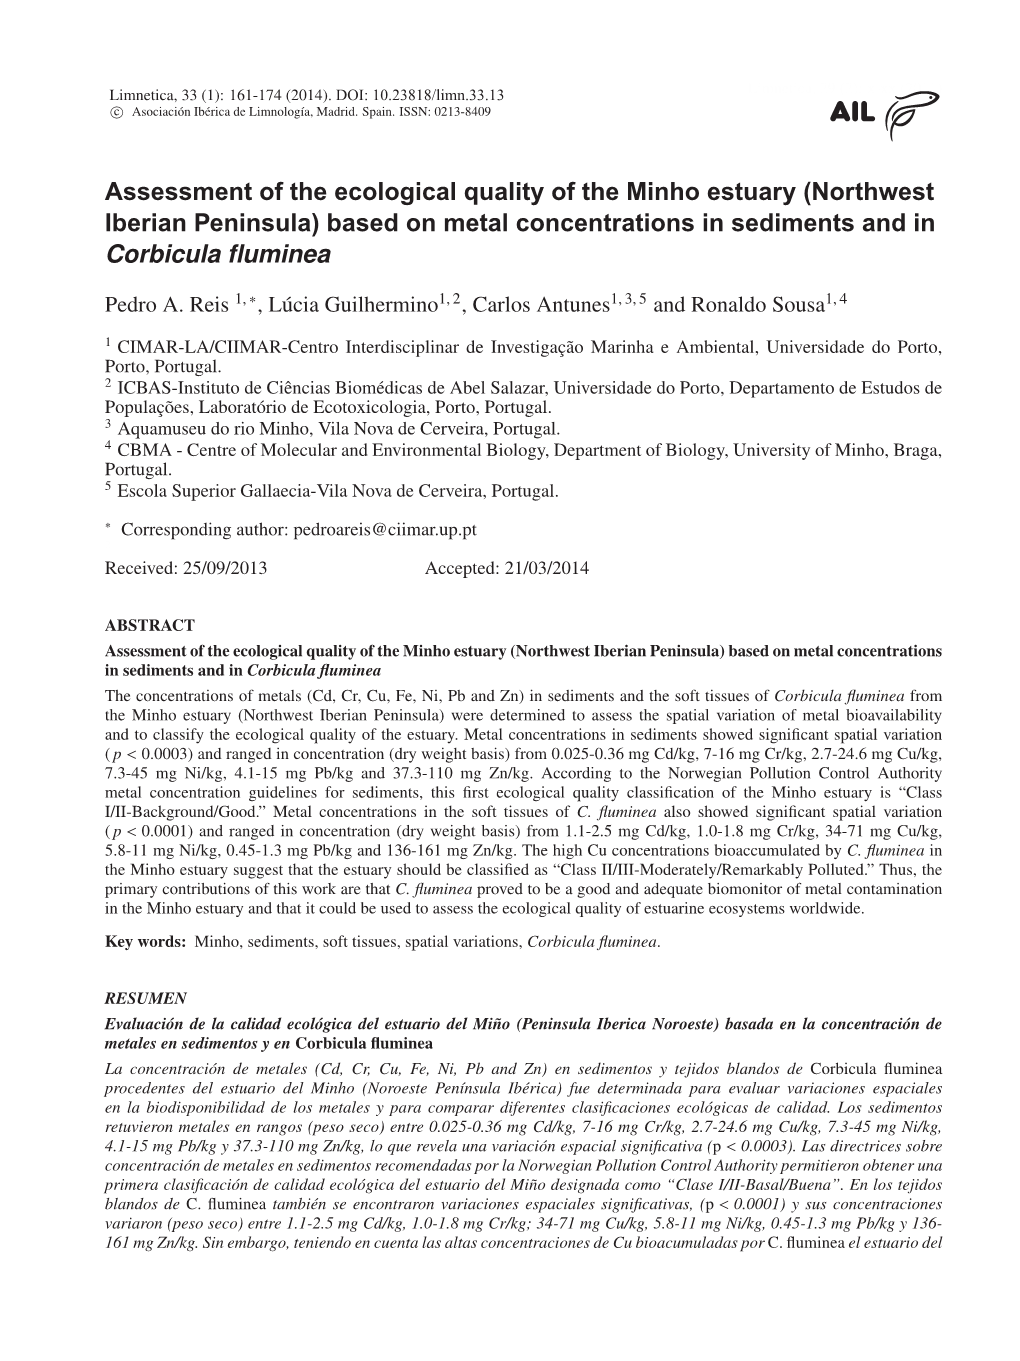 Assessment of the Ecological Quality of the Minho Estuary (Northwest Iberian Peninsula) Based on Metal Concentrations in Sediments and in Corbicula ﬂuminea